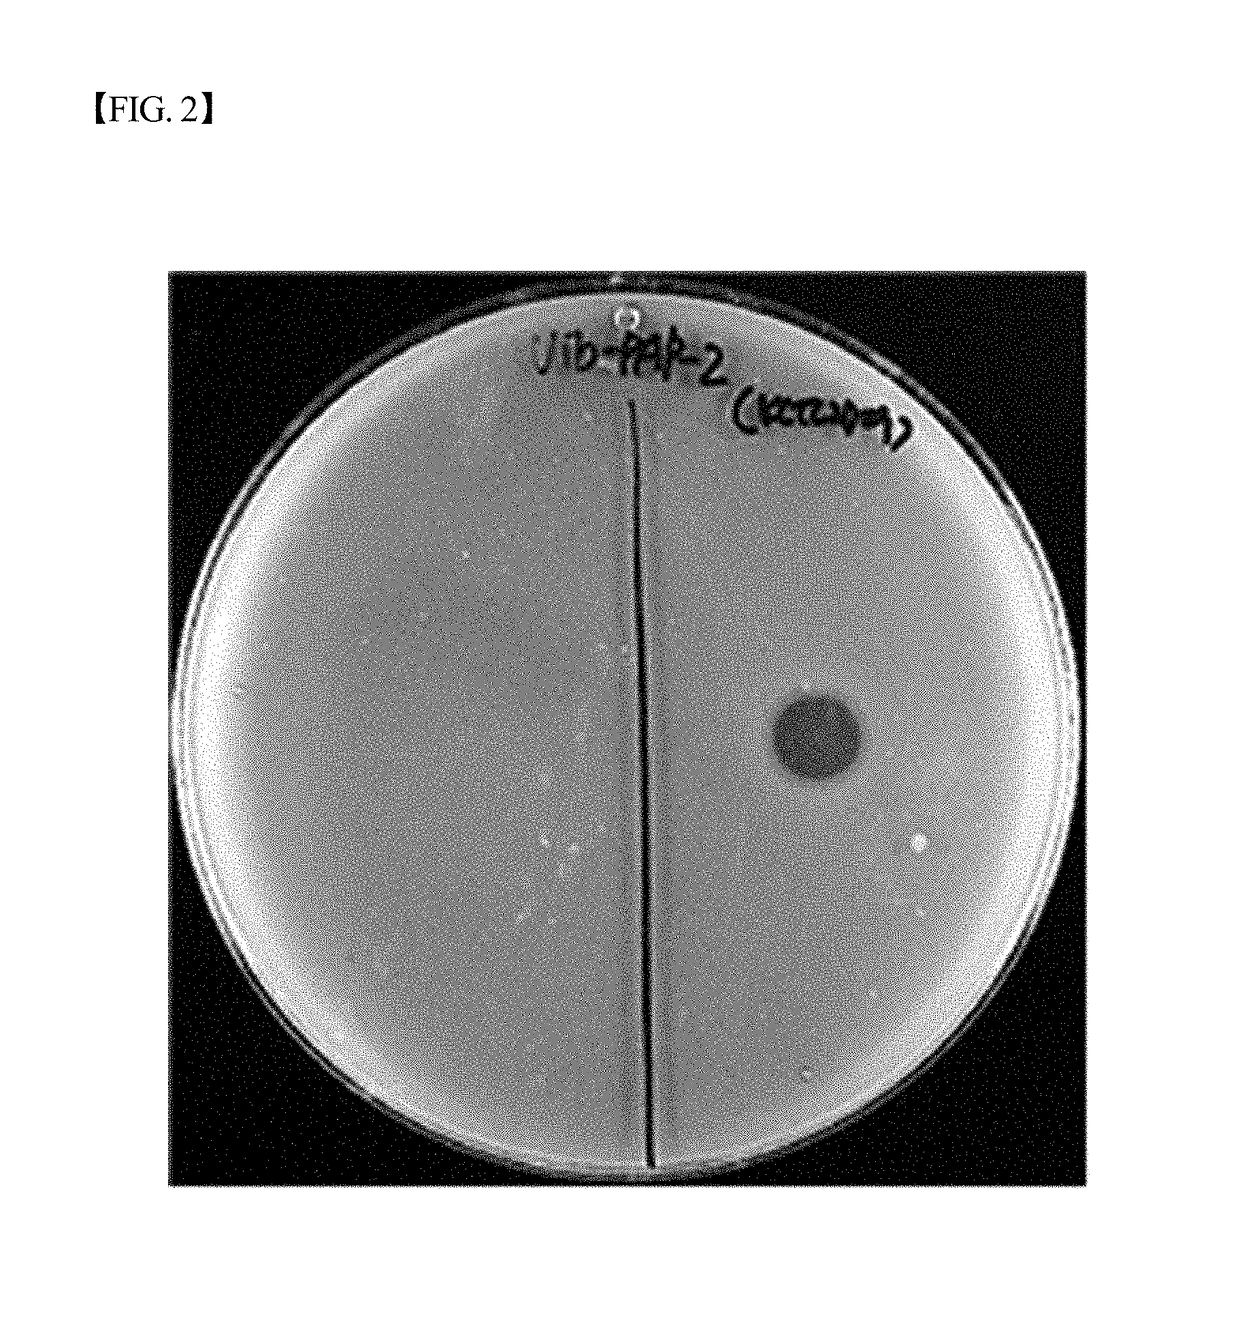 Novel vibrio parahaemolyticus bacteriophage vib-pap-2 and use thereof for inhibiting proliferation of vibrio parahaemolyticus